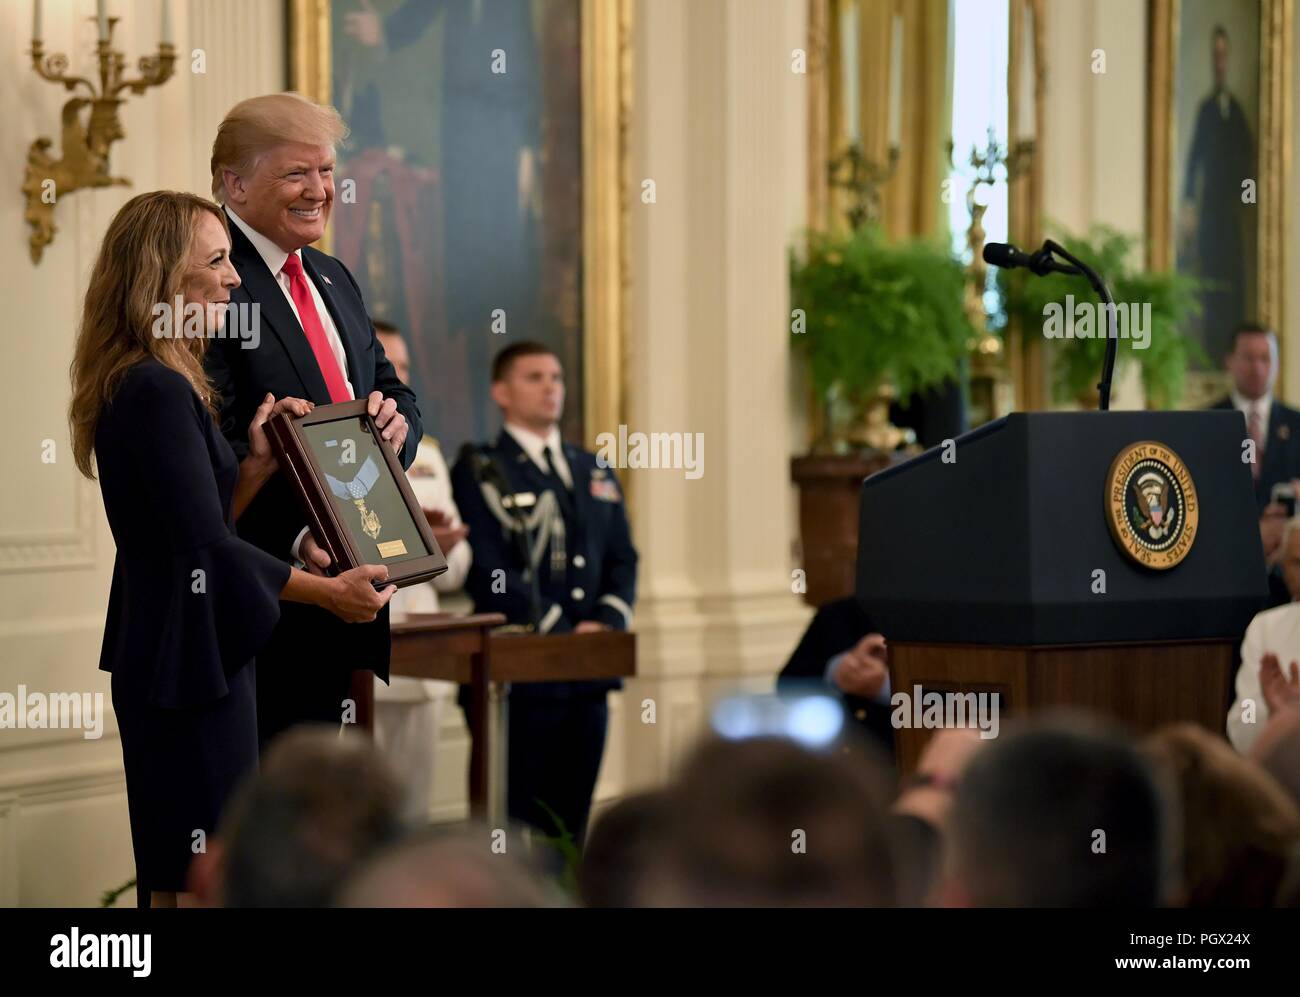 President Donald J. Trump presenting the Medal of Honor to Valerie Nessel, the spouse of U.S. Air Force Tech, August 22, 2018. Sgt. John Chapman, at the Medal of Honor ceremony, White House, Washington, D.C. Image courtesy Wayne Clark / Secretary of the Air Force Public Affairs. () Stock Photo